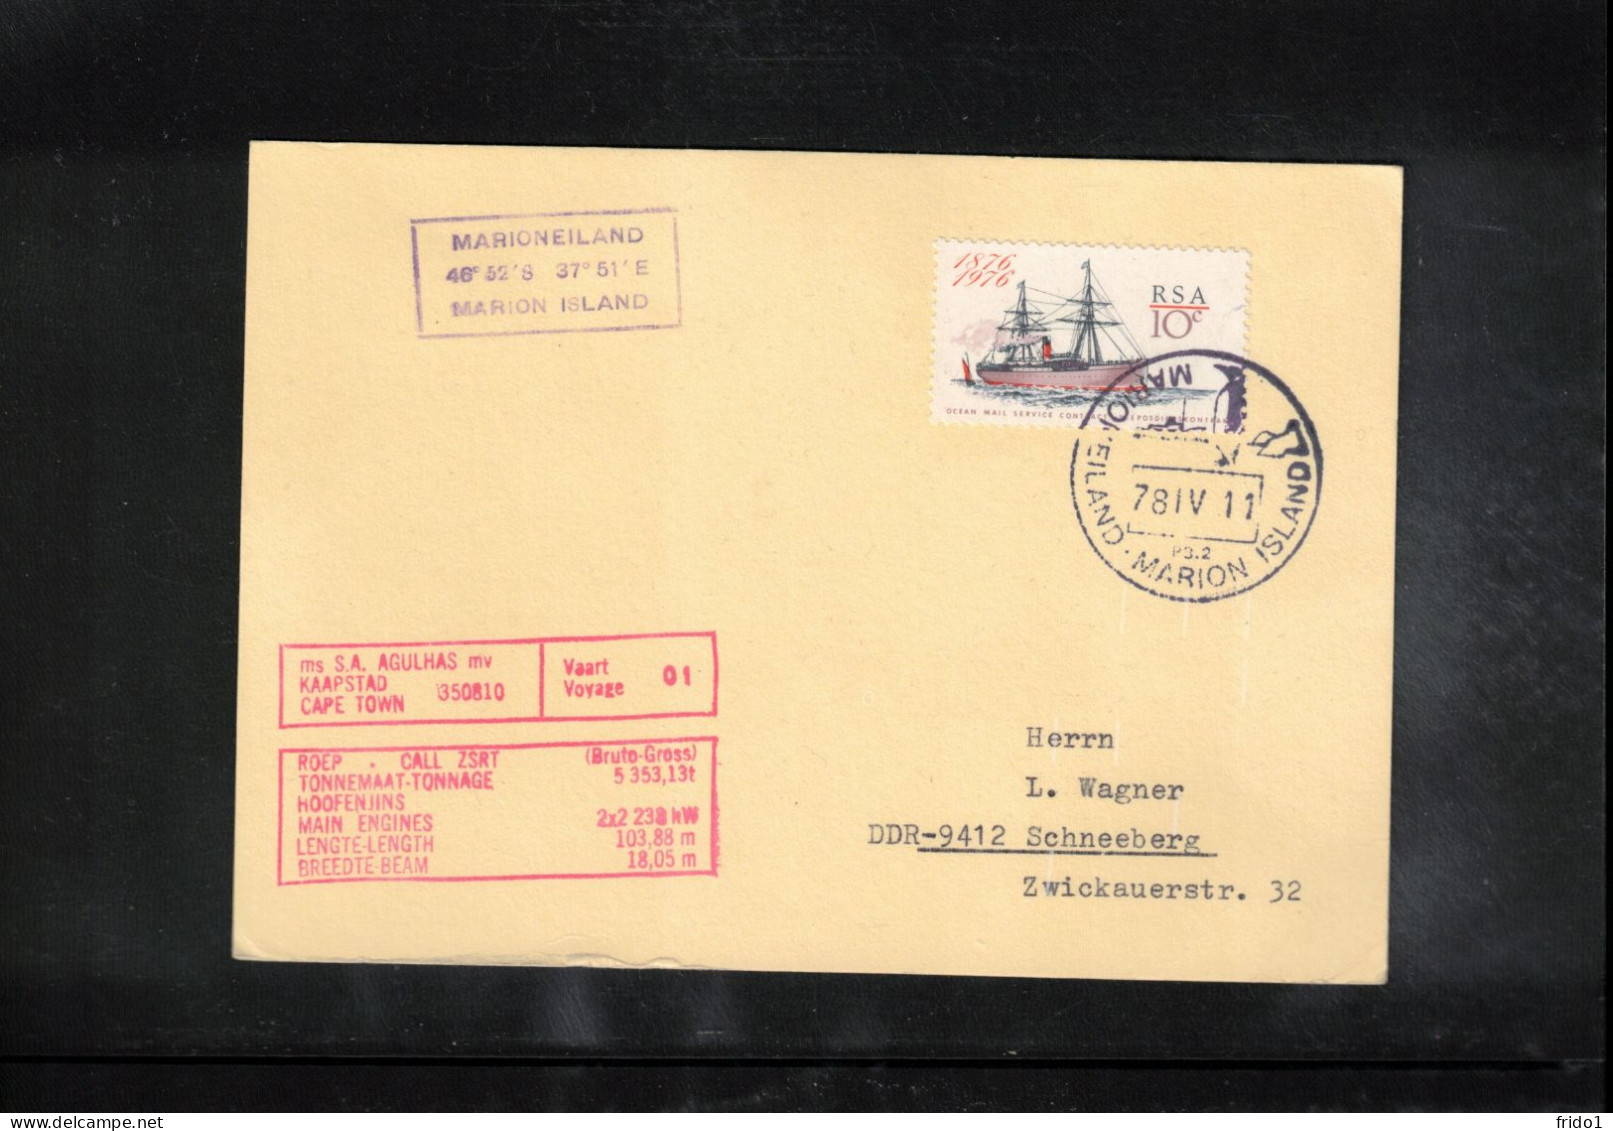 South Africa 1978 Antarctica - Ship AGULHAS - Marion Island Interesting Cover - Polar Ships & Icebreakers